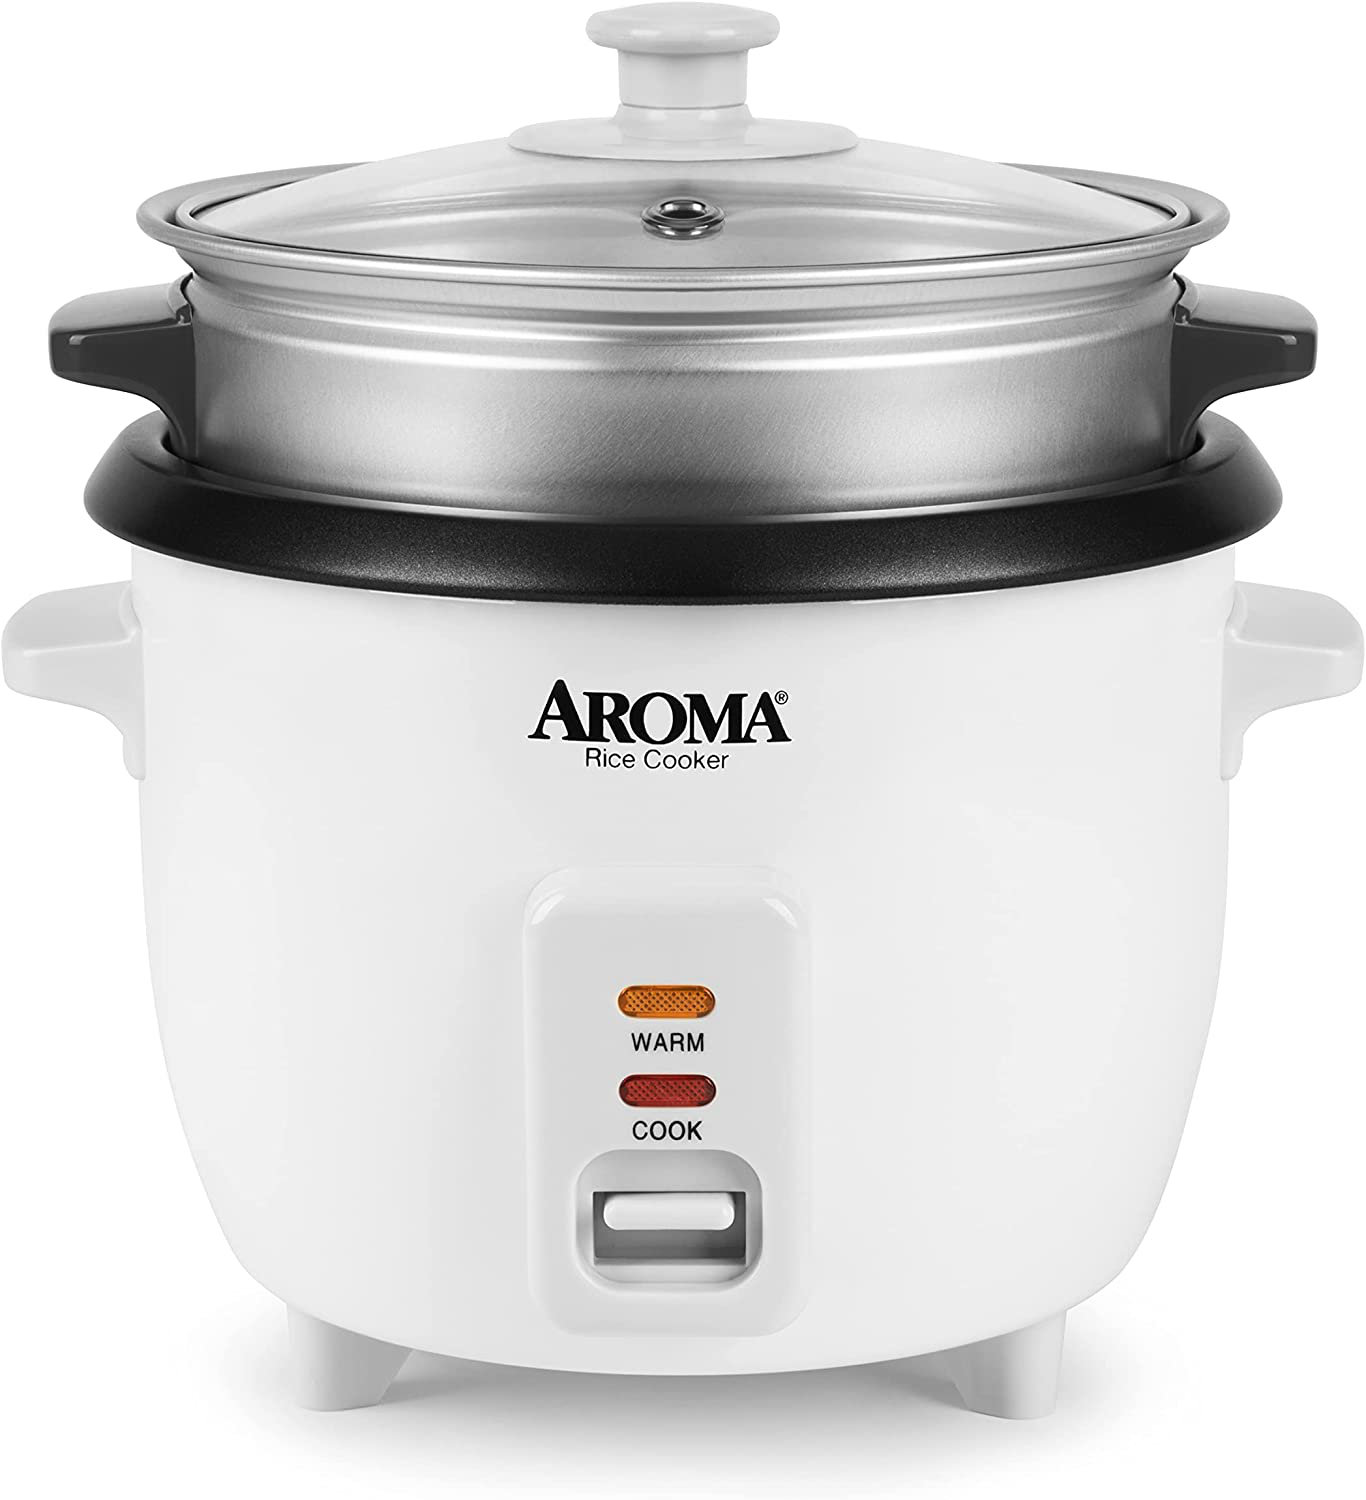 Aroma Digital Rice Cooker and Food Steamer Review - Normal Consumer